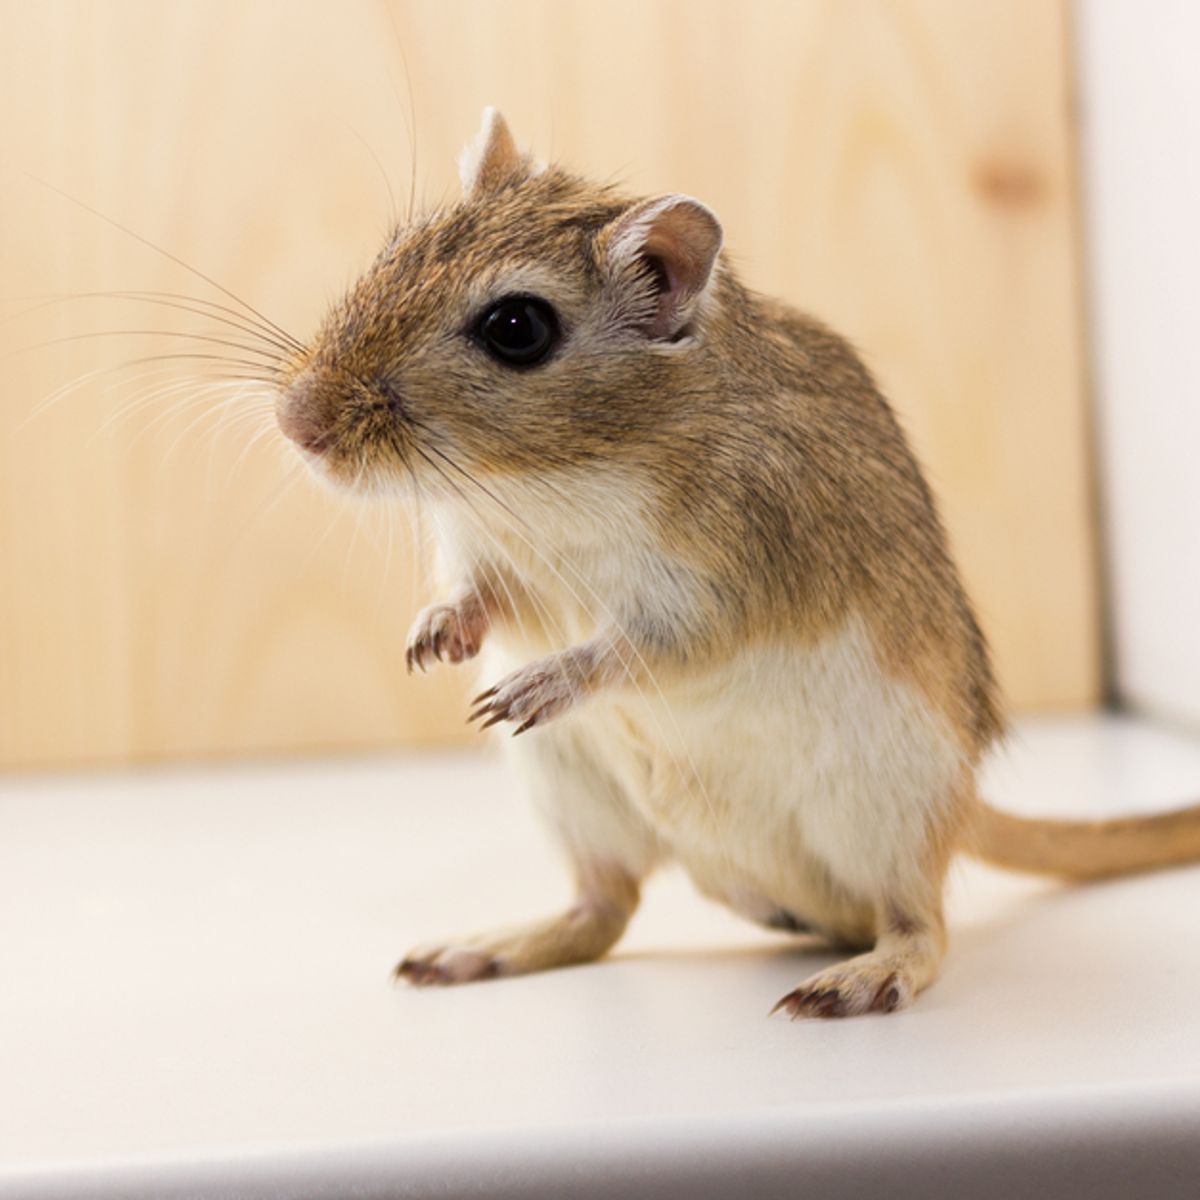 What Are The Differences Between A Gerbil And A Hamster?